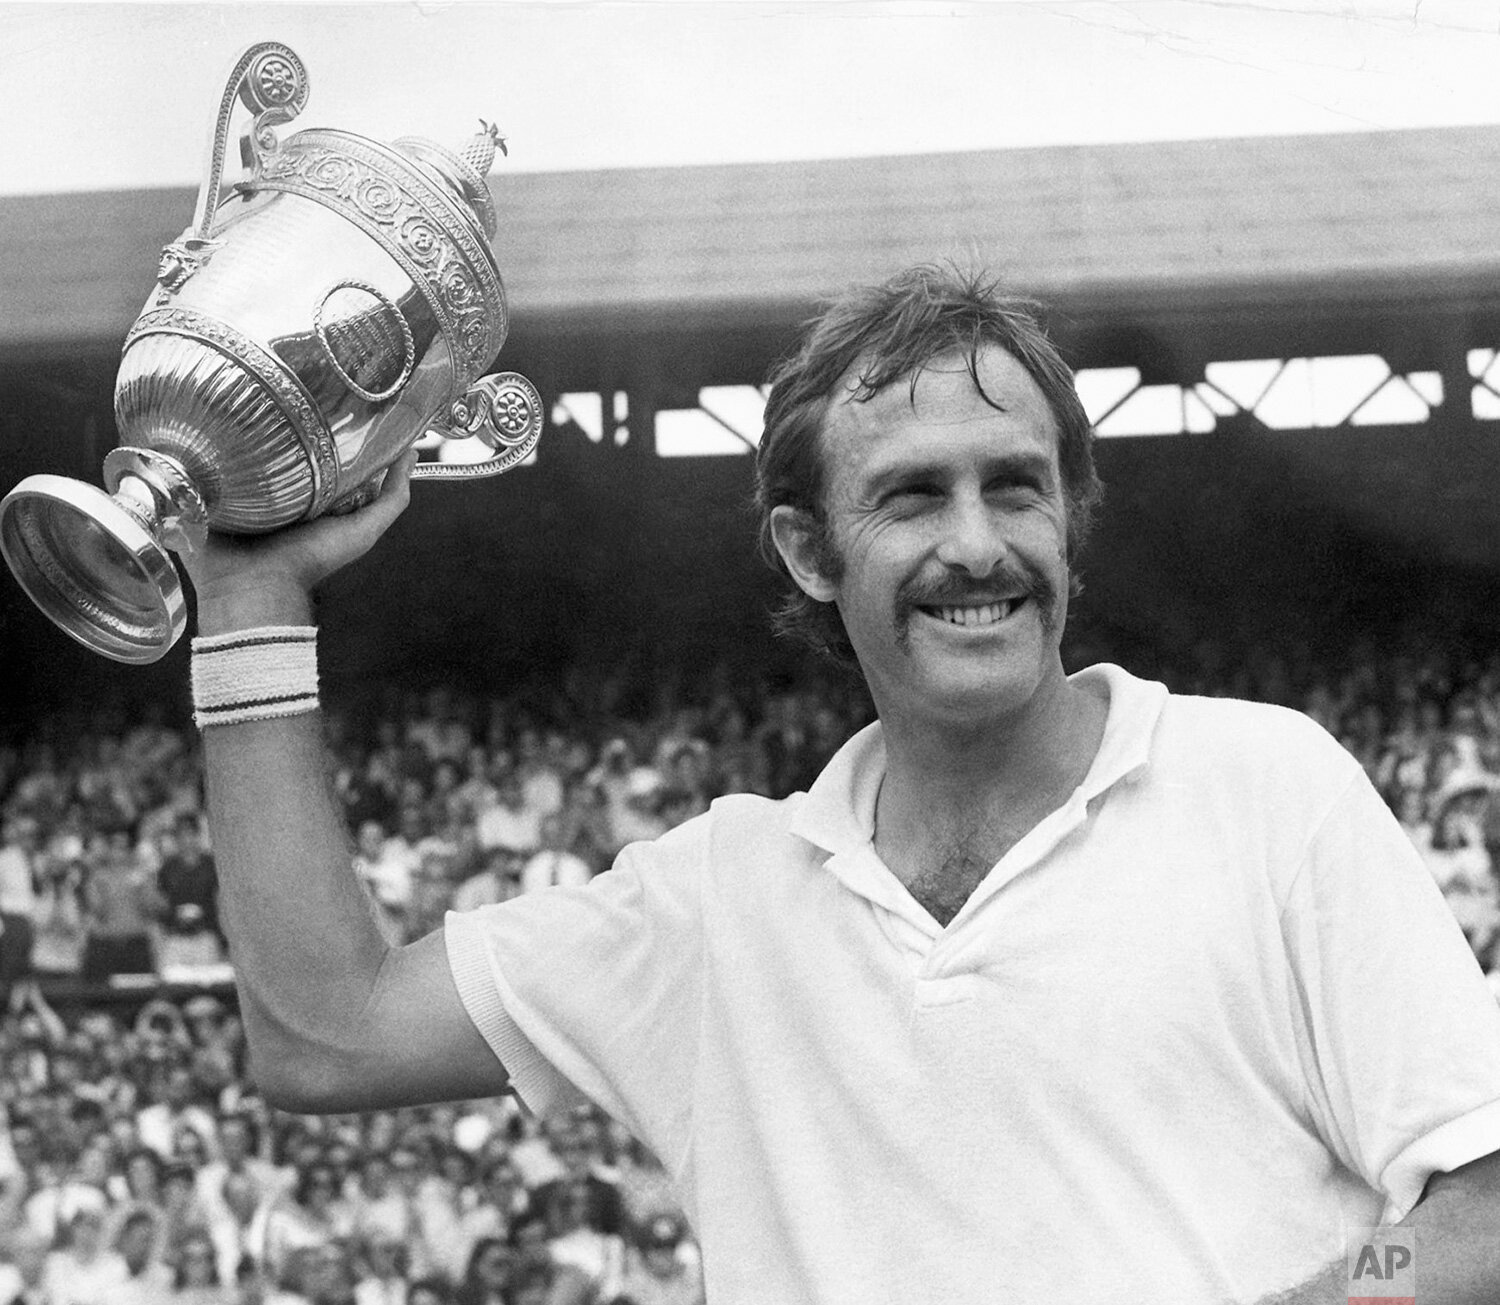  John Newcombe of Australia poses with the trophy presented to him by HRH The Duke of Kent at Wimbledon, July 3, 1971 after retaining his men's singles title against Stan Smith of Pasadena, California, on the Centre Court, winning by 6-3, 5-7, 2-6, 6